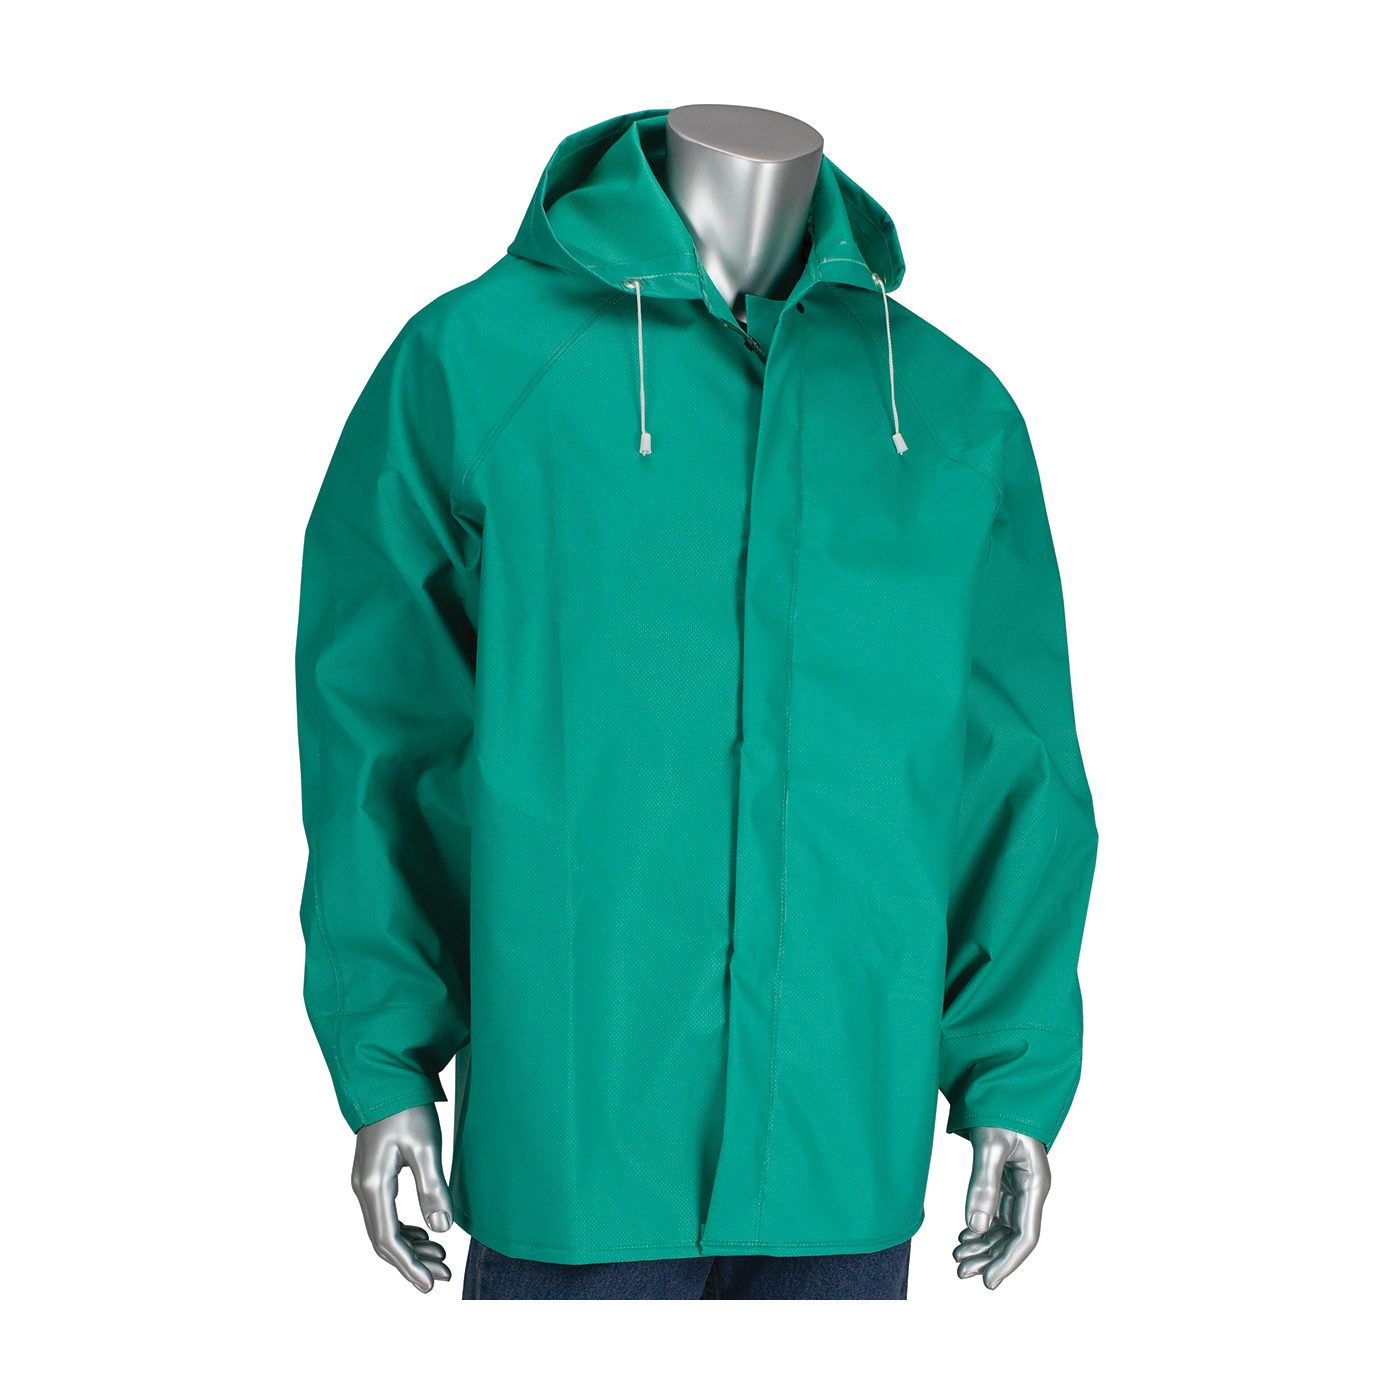 PIP® FALCON™ ChemFR™ 205-420JH/XL Rain Jacket With Hood, XL, Green, Nylon/PVC, Resists: Flame and Water, ASTM D6413